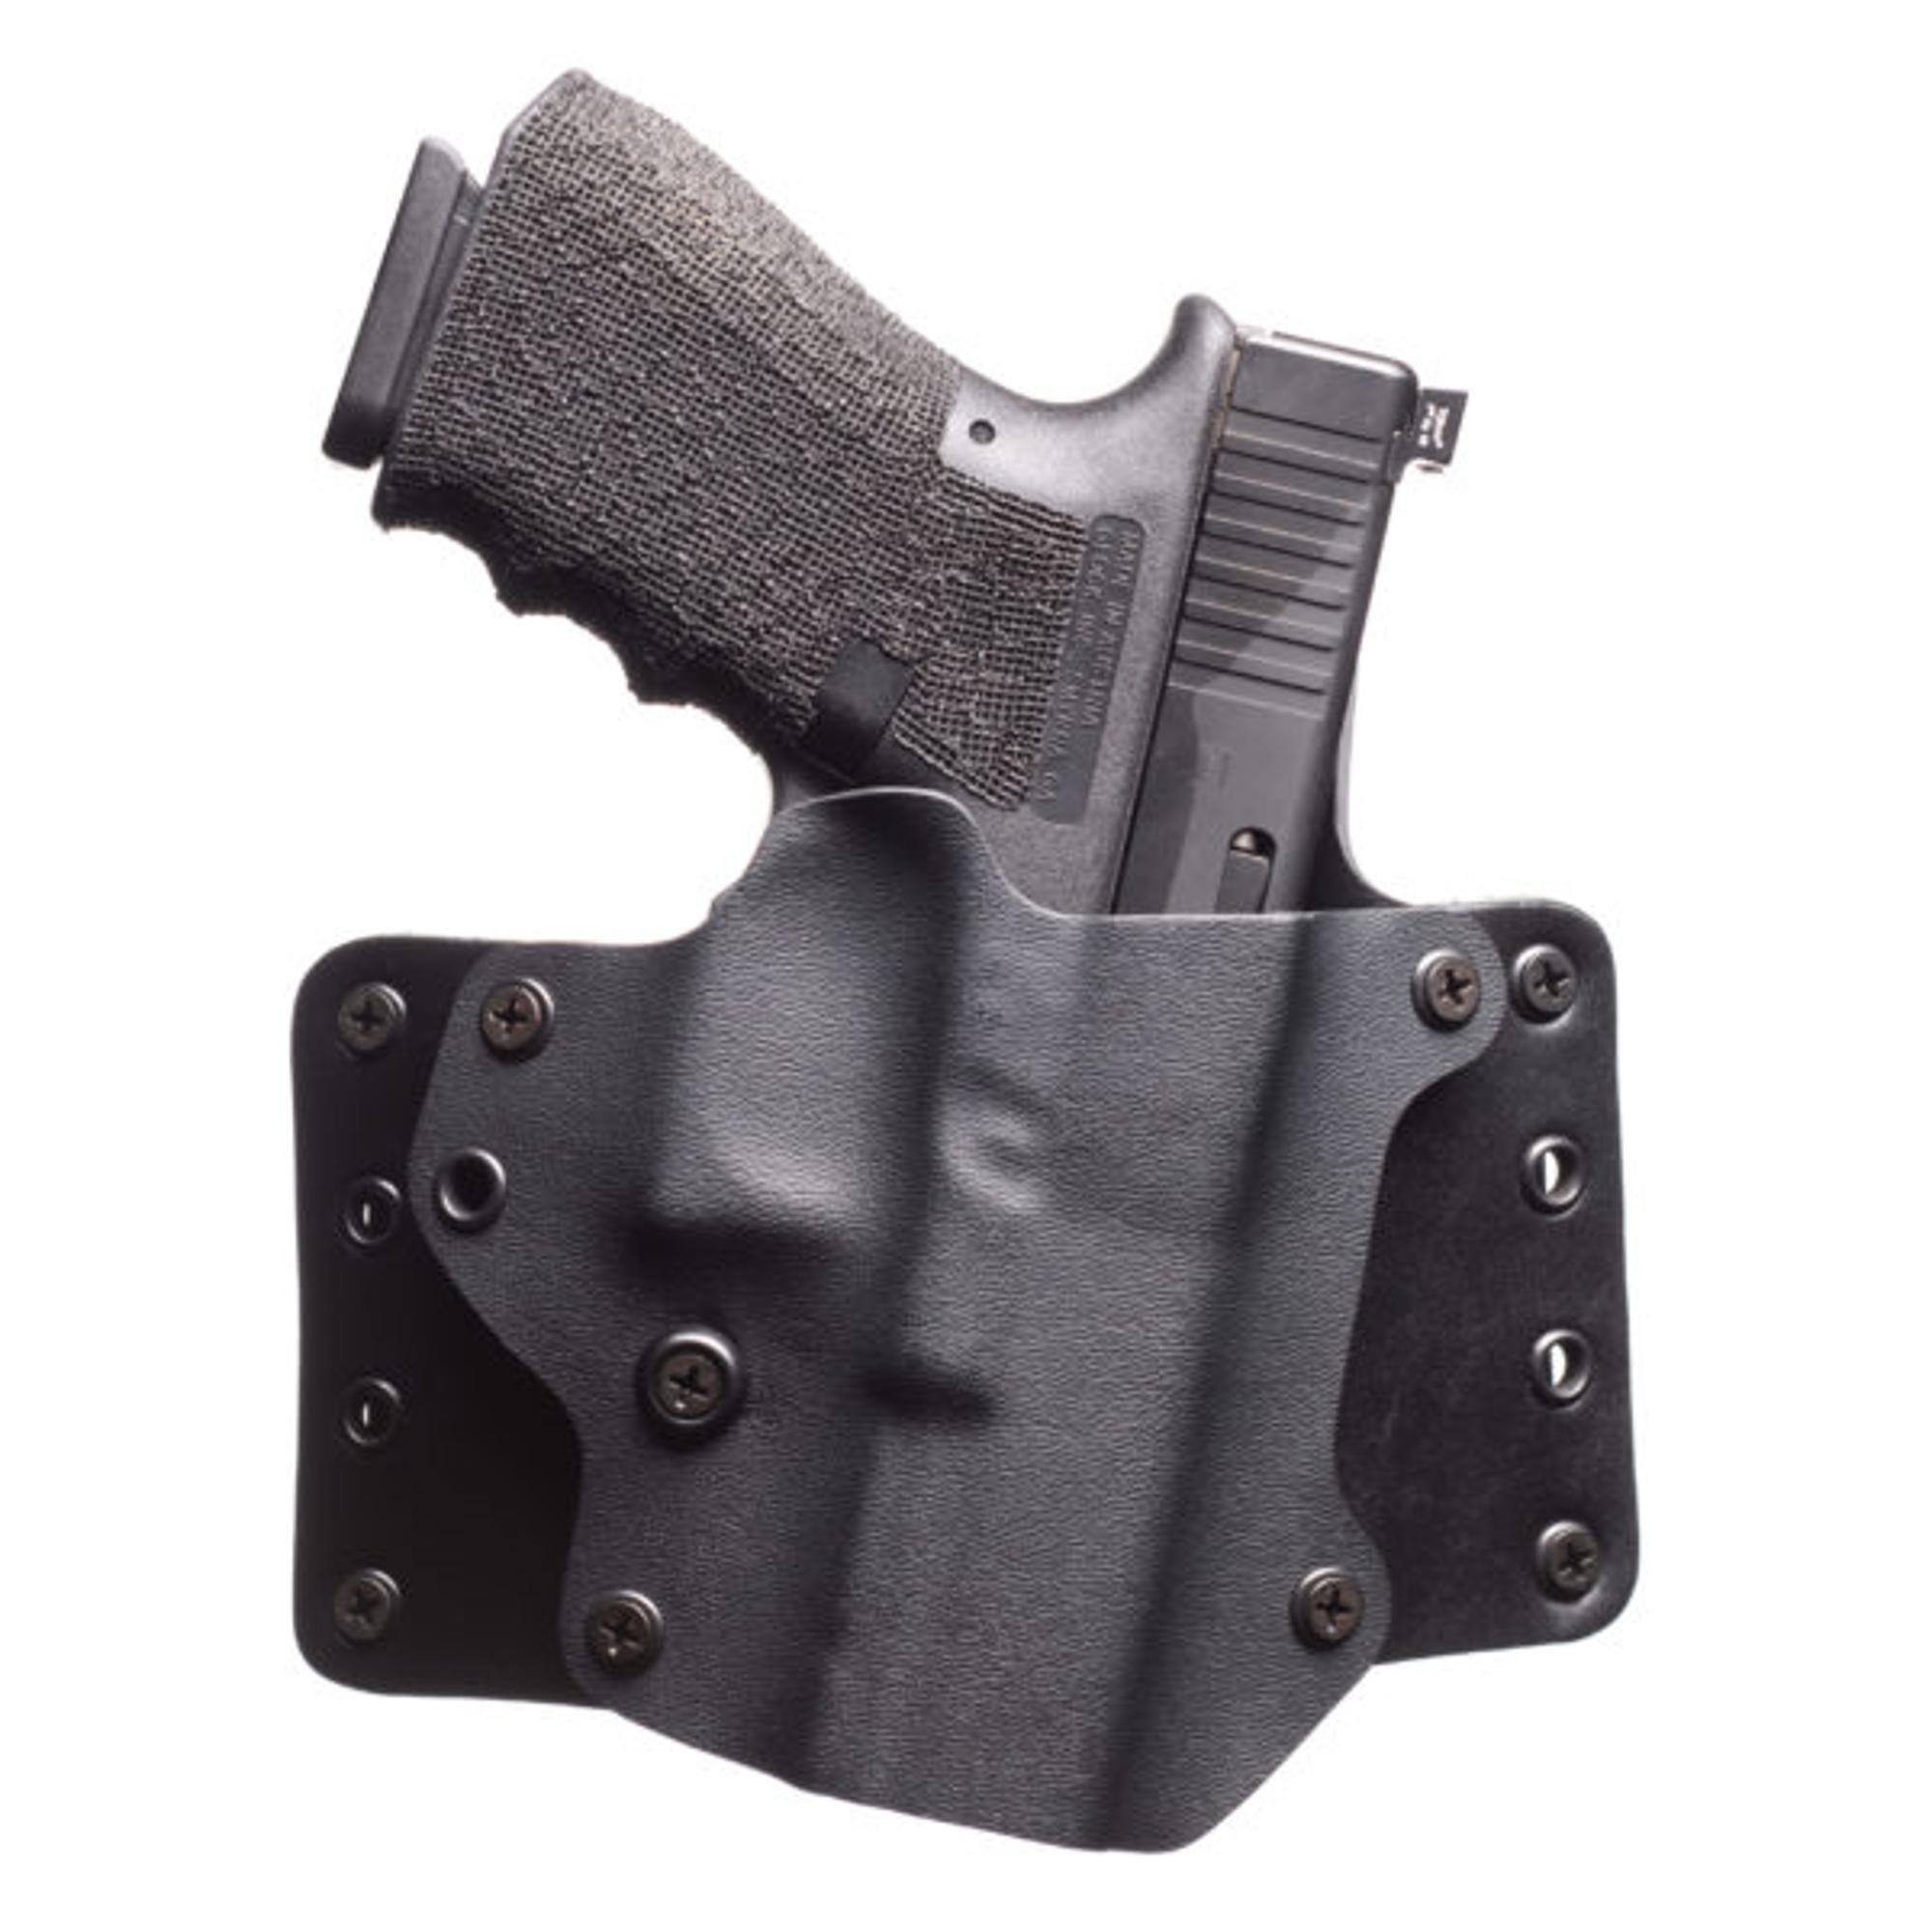 Rh Leather Wing Holster Shield .45 Blk